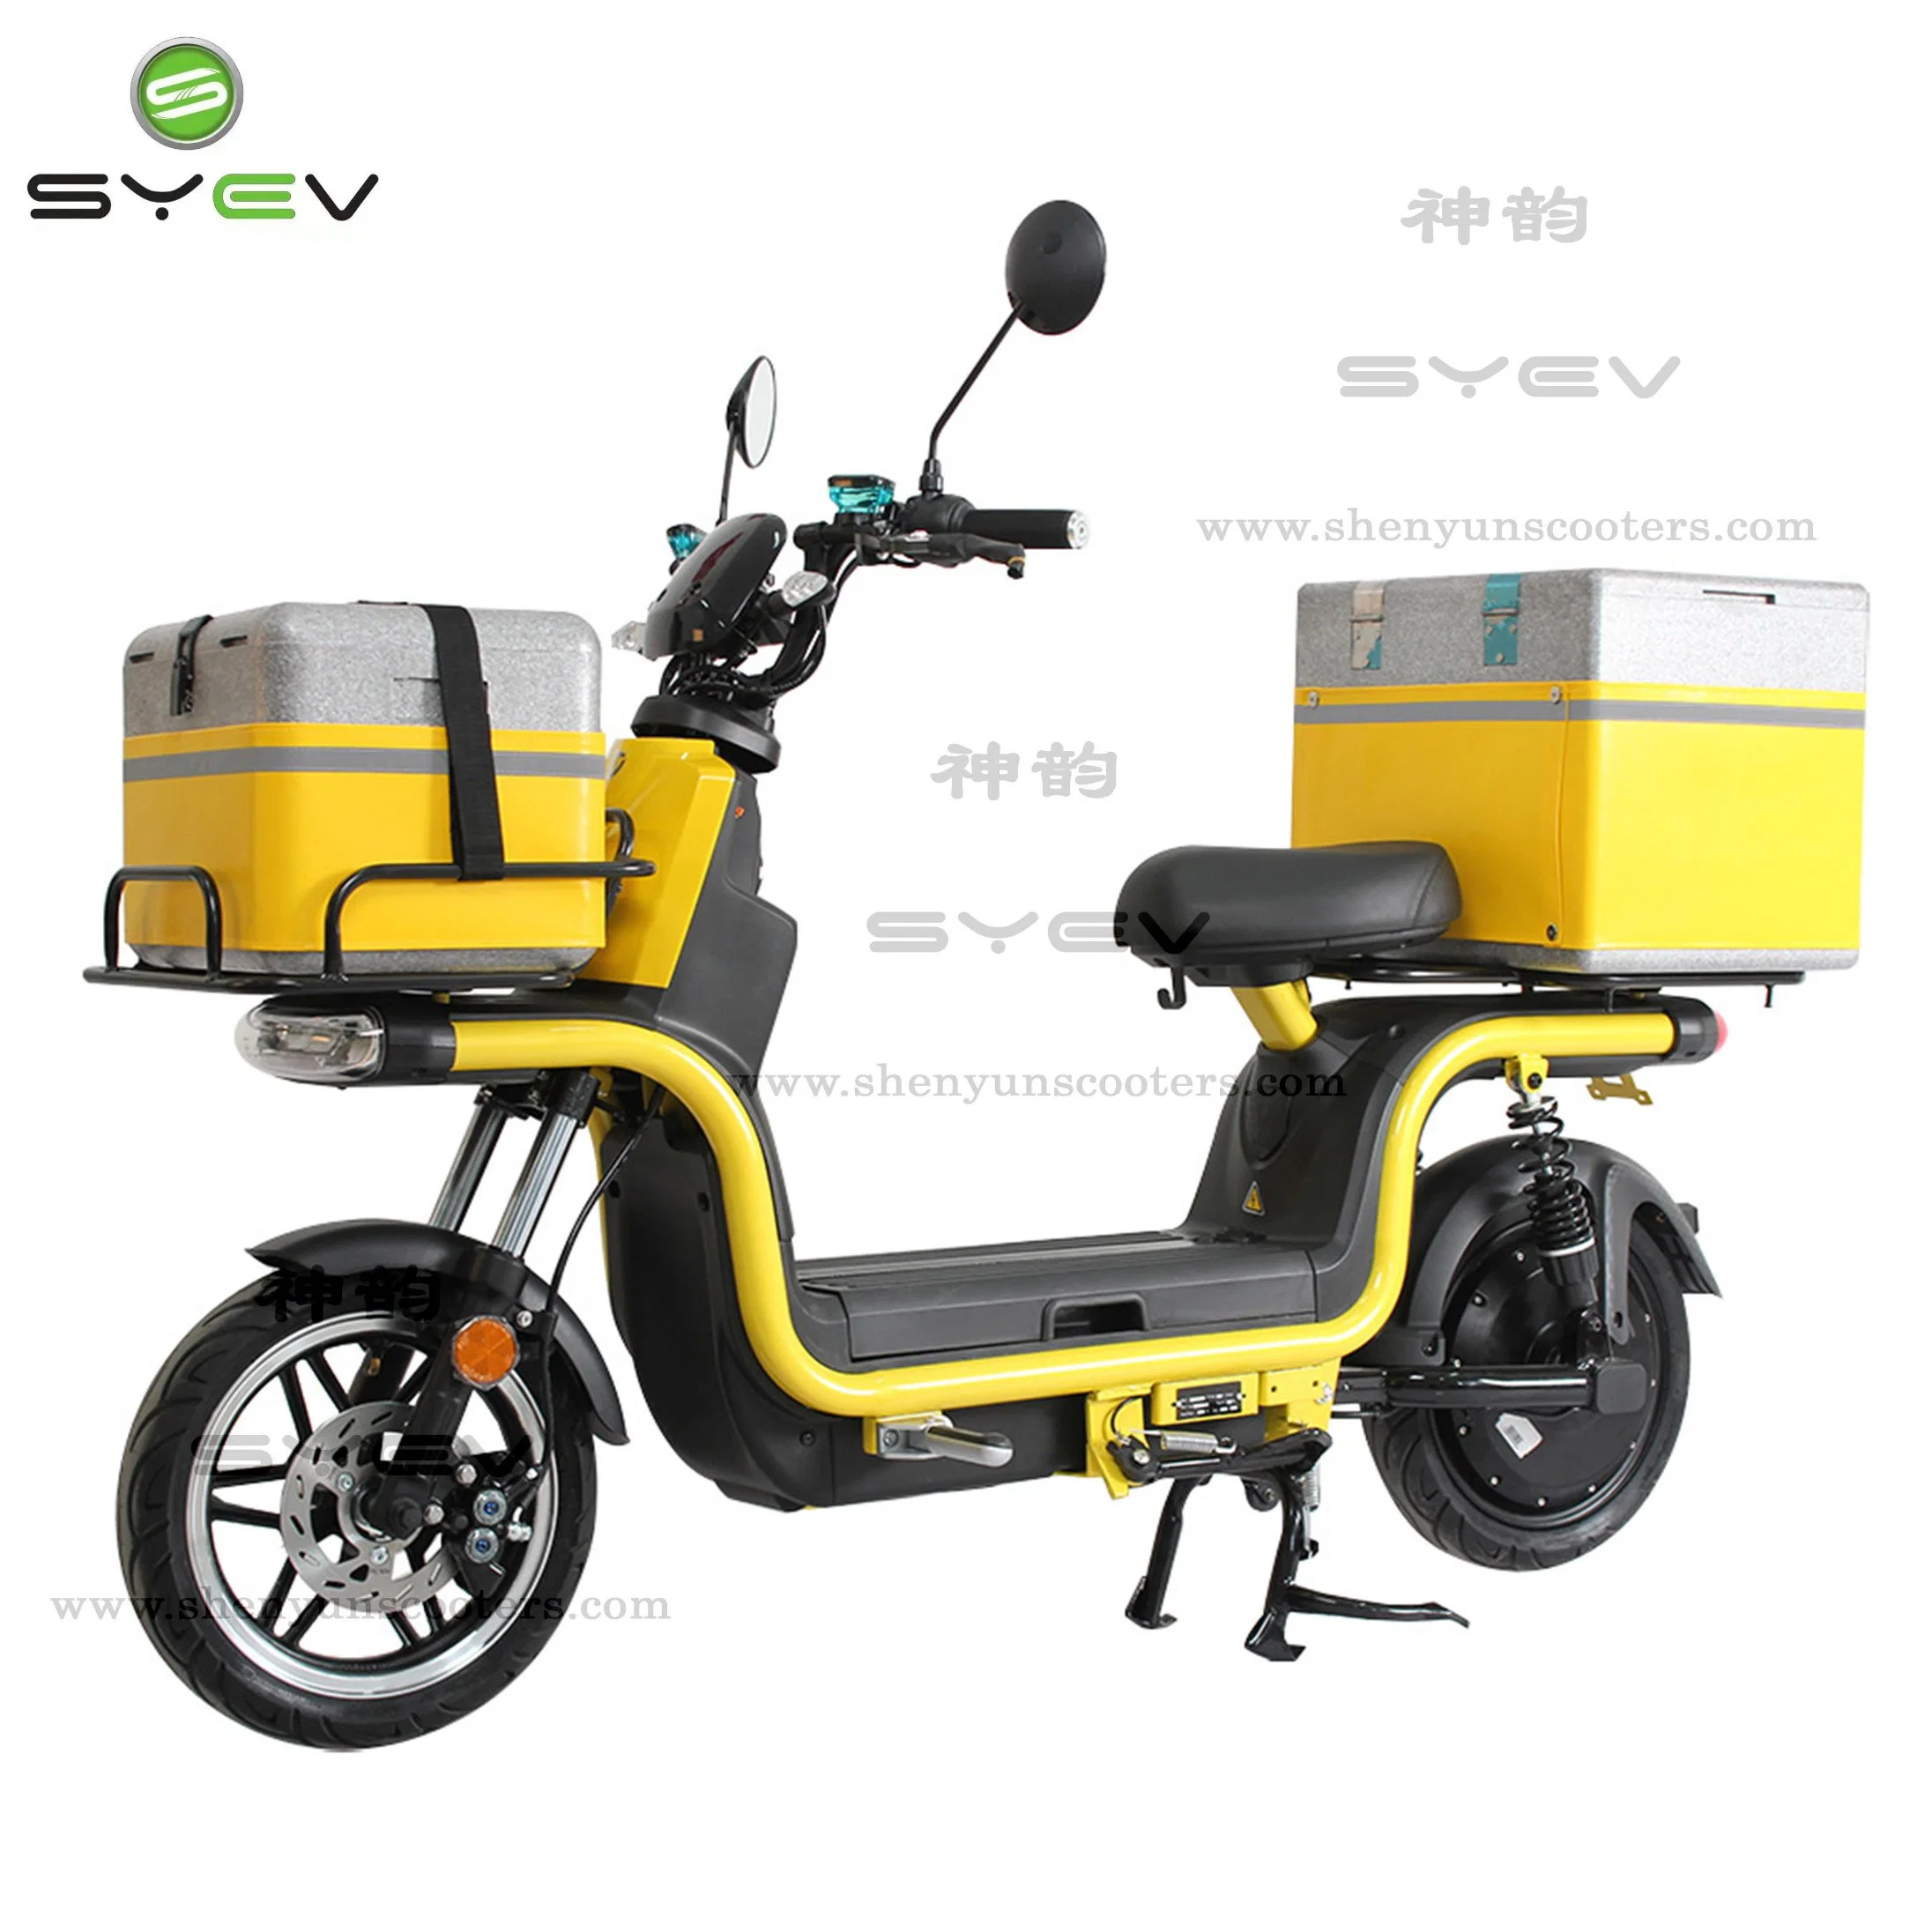 Patent Design Delivery Electric Scooter Powerful Electric Motorcycle 1200W EEC E Bike